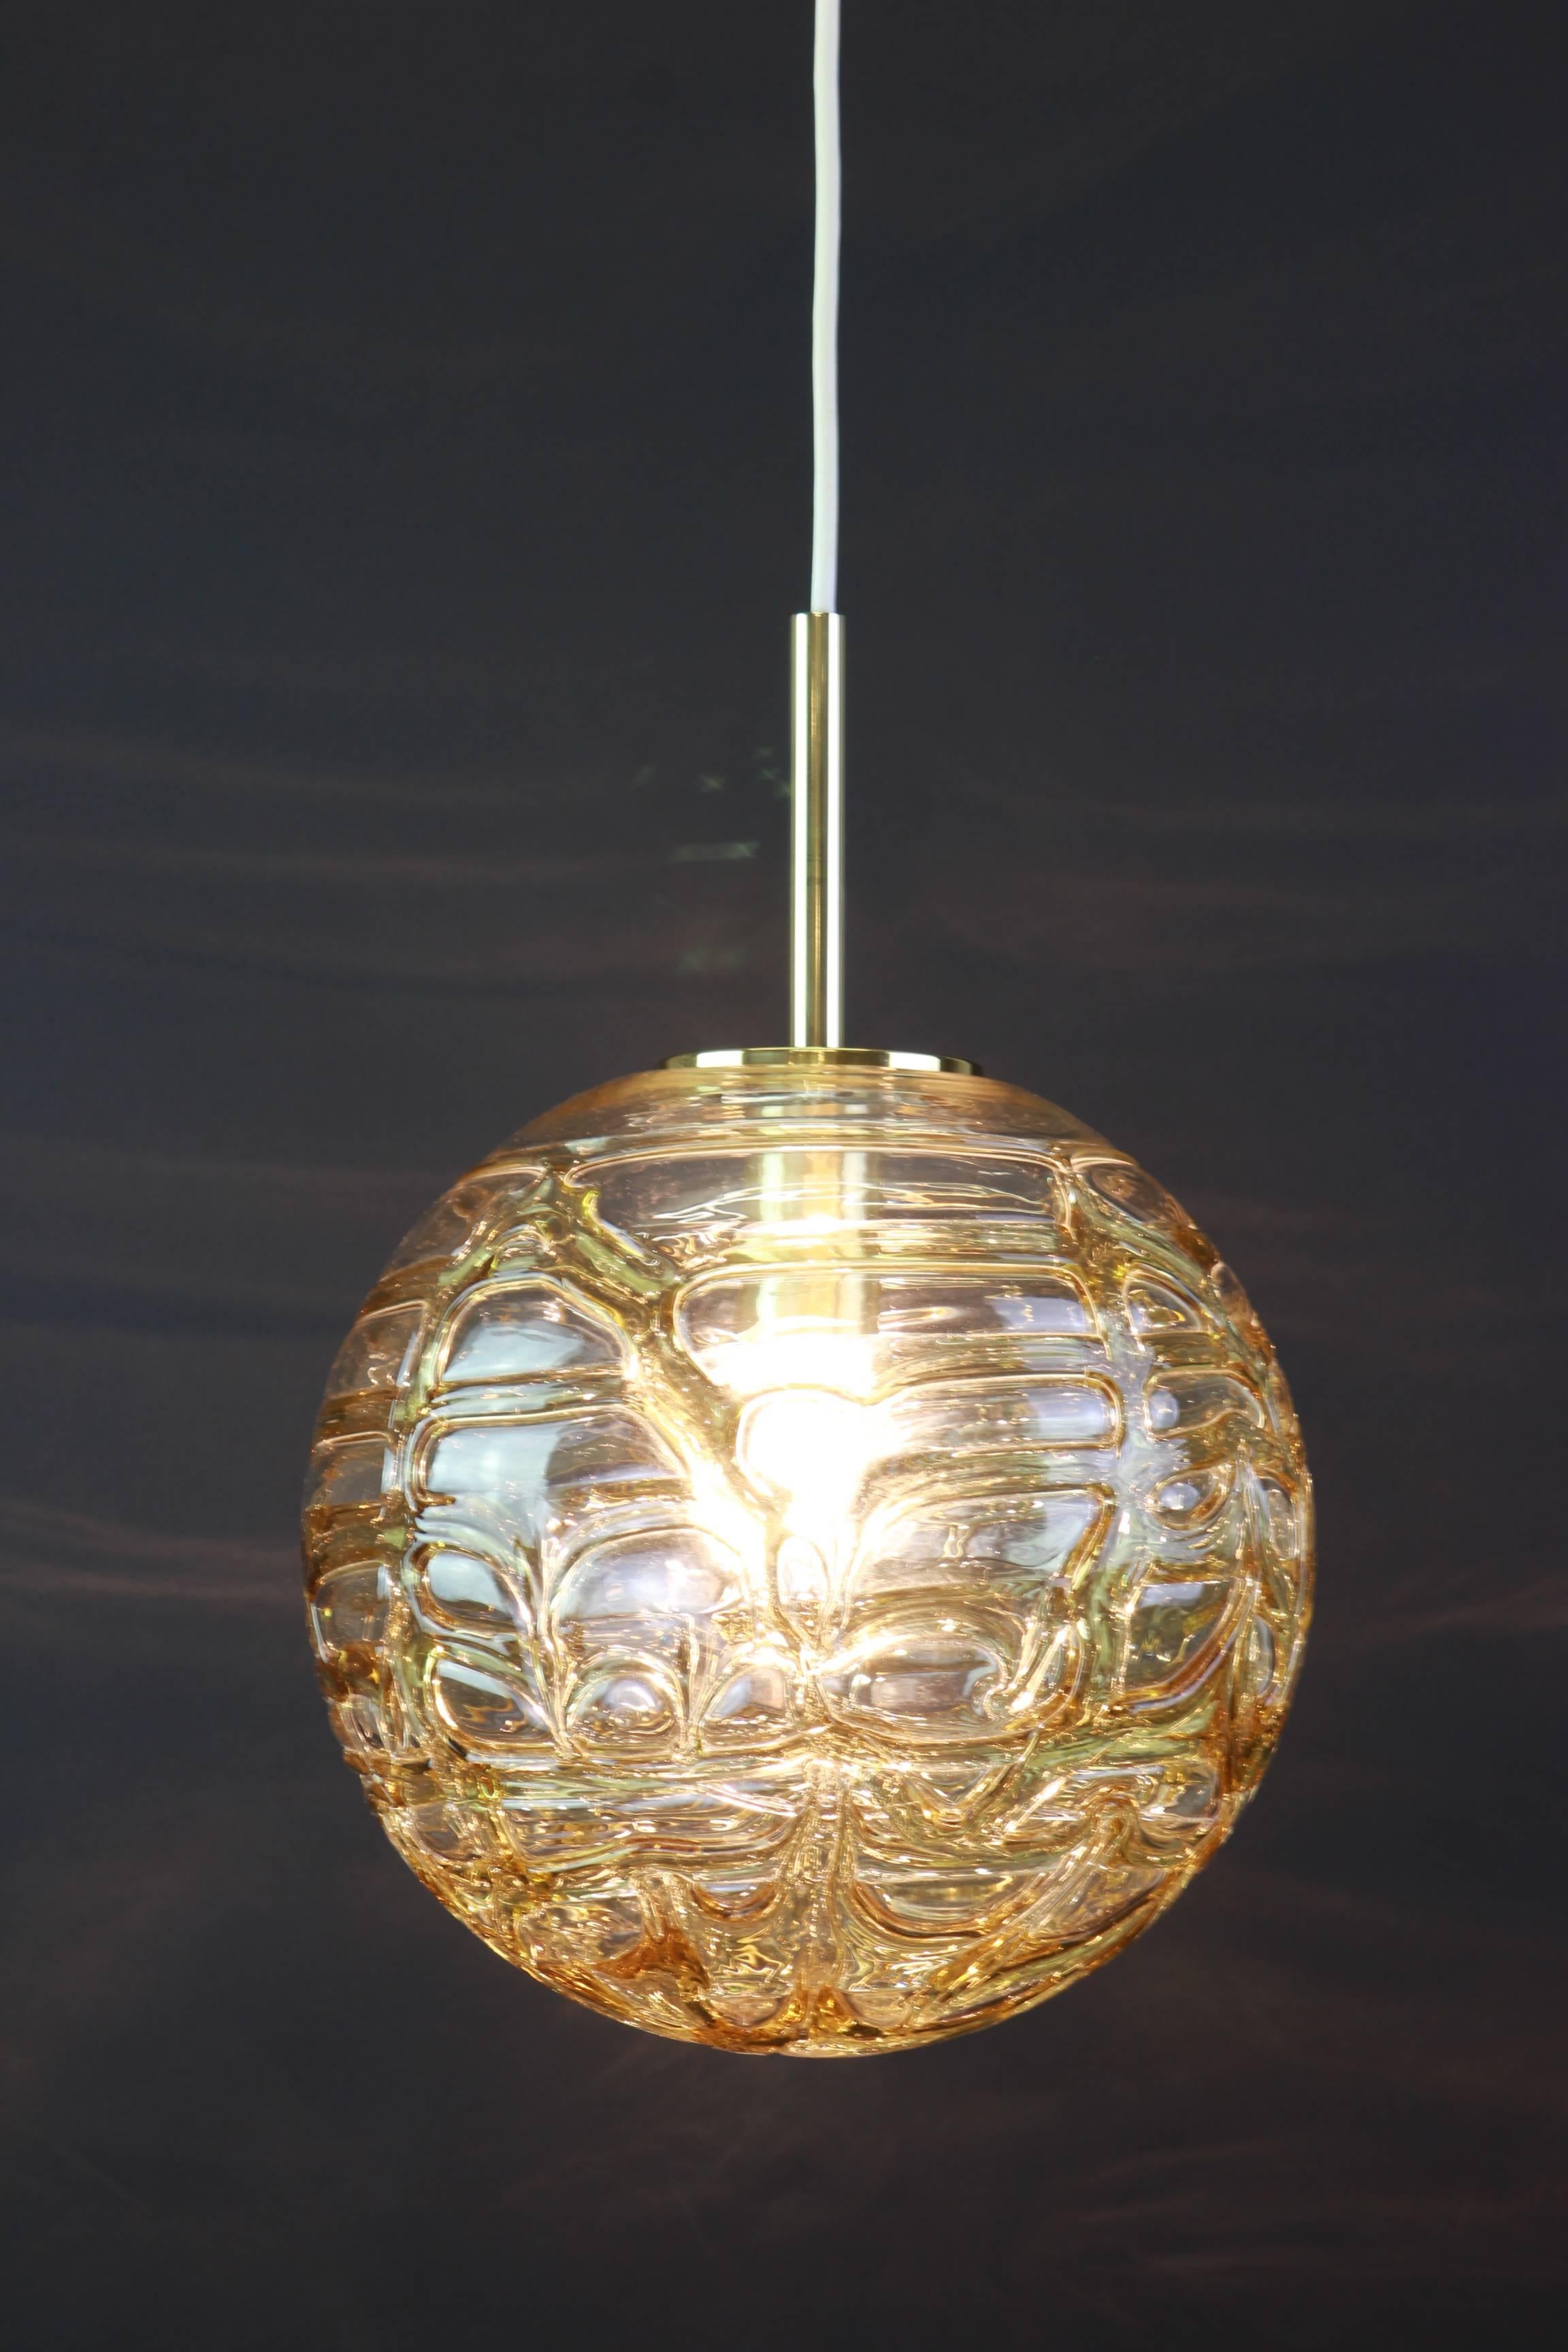 Doria ceiling light with large volcanic Murano glass ball.
High quality of materials - gives a wonderful light effect when it is on.

High quality and in very good condition. Cleaned, well-wired and ready to use. 

The fixture requires one